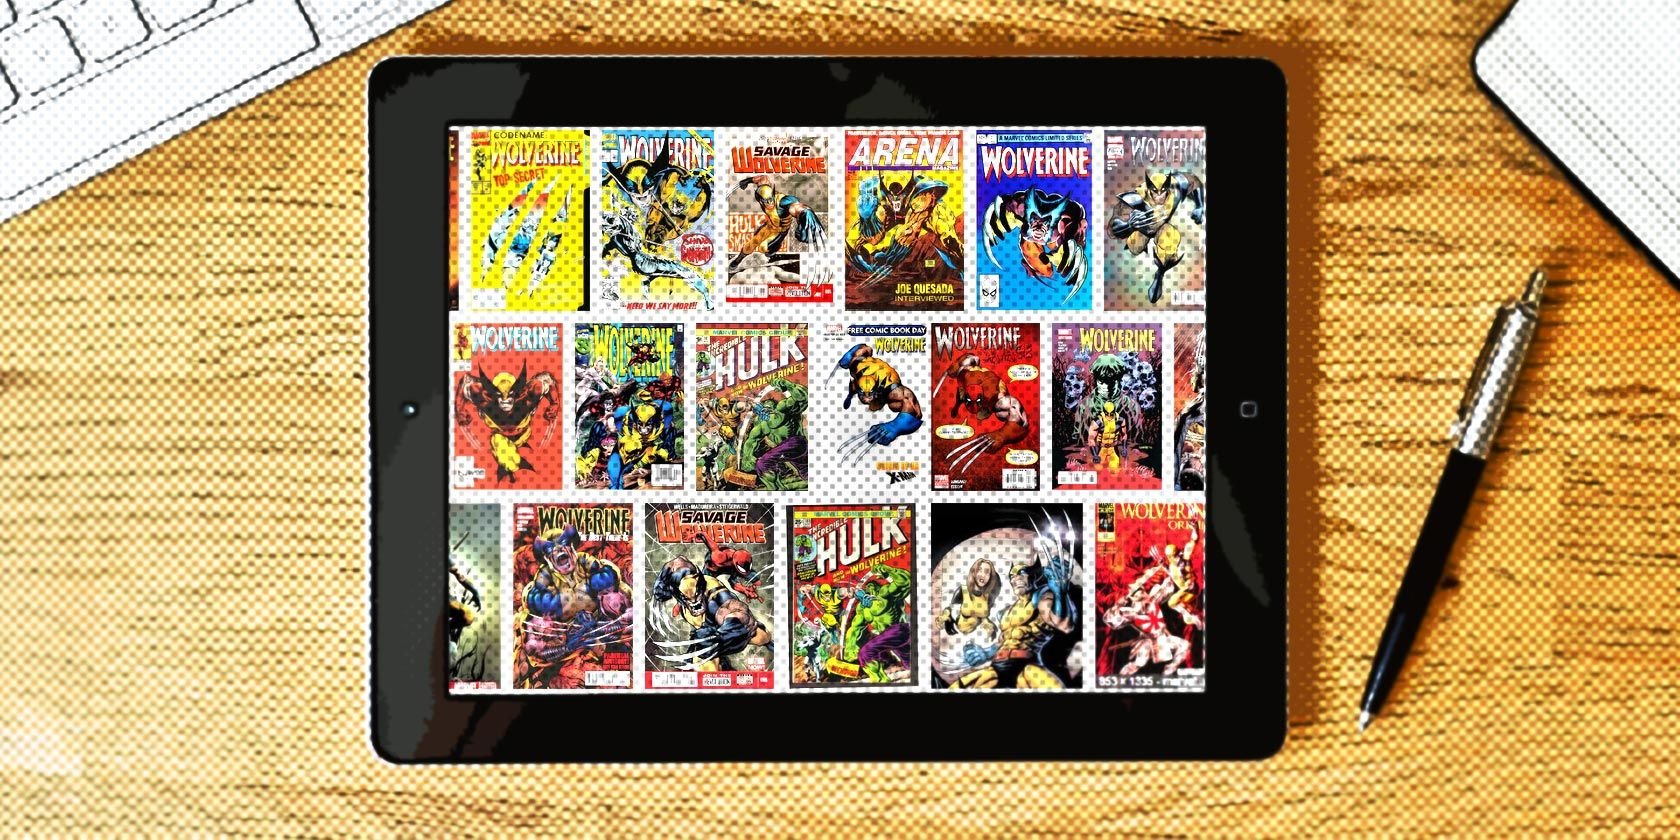 How to Read Comics on iPad: The 10 Best Comic Book Reader Apps